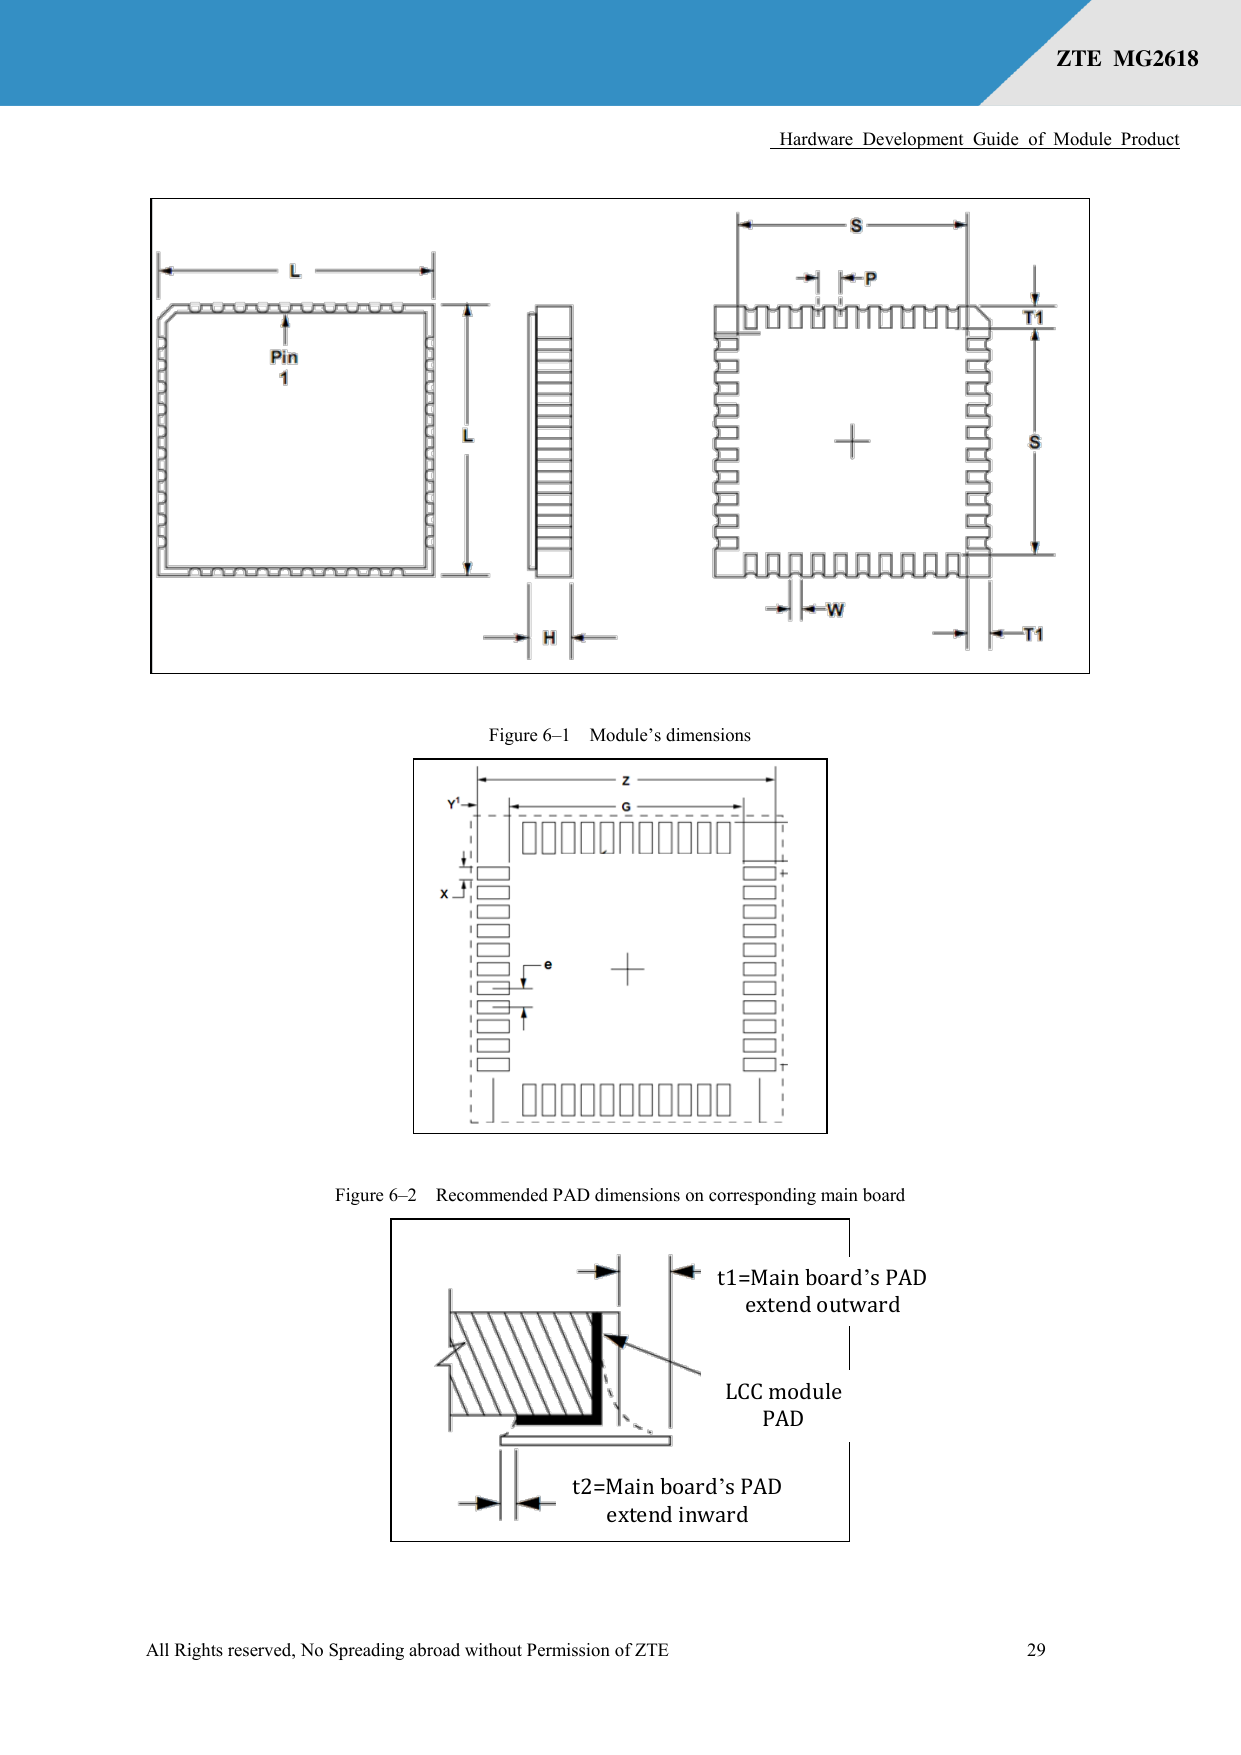      Hardware  Development  Guide  of  Module  Product  All Rights reserved, No Spreading abroad without Permission of ZTE              29 ZTE  MG2618    Figure 6–1  Module’s dimensions  Figure 6–2  Recommended PAD dimensions on corresponding main board  t2=Main board’s PAD extend inward   t1=Main board’s PAD extend outward   LCC module PAD 